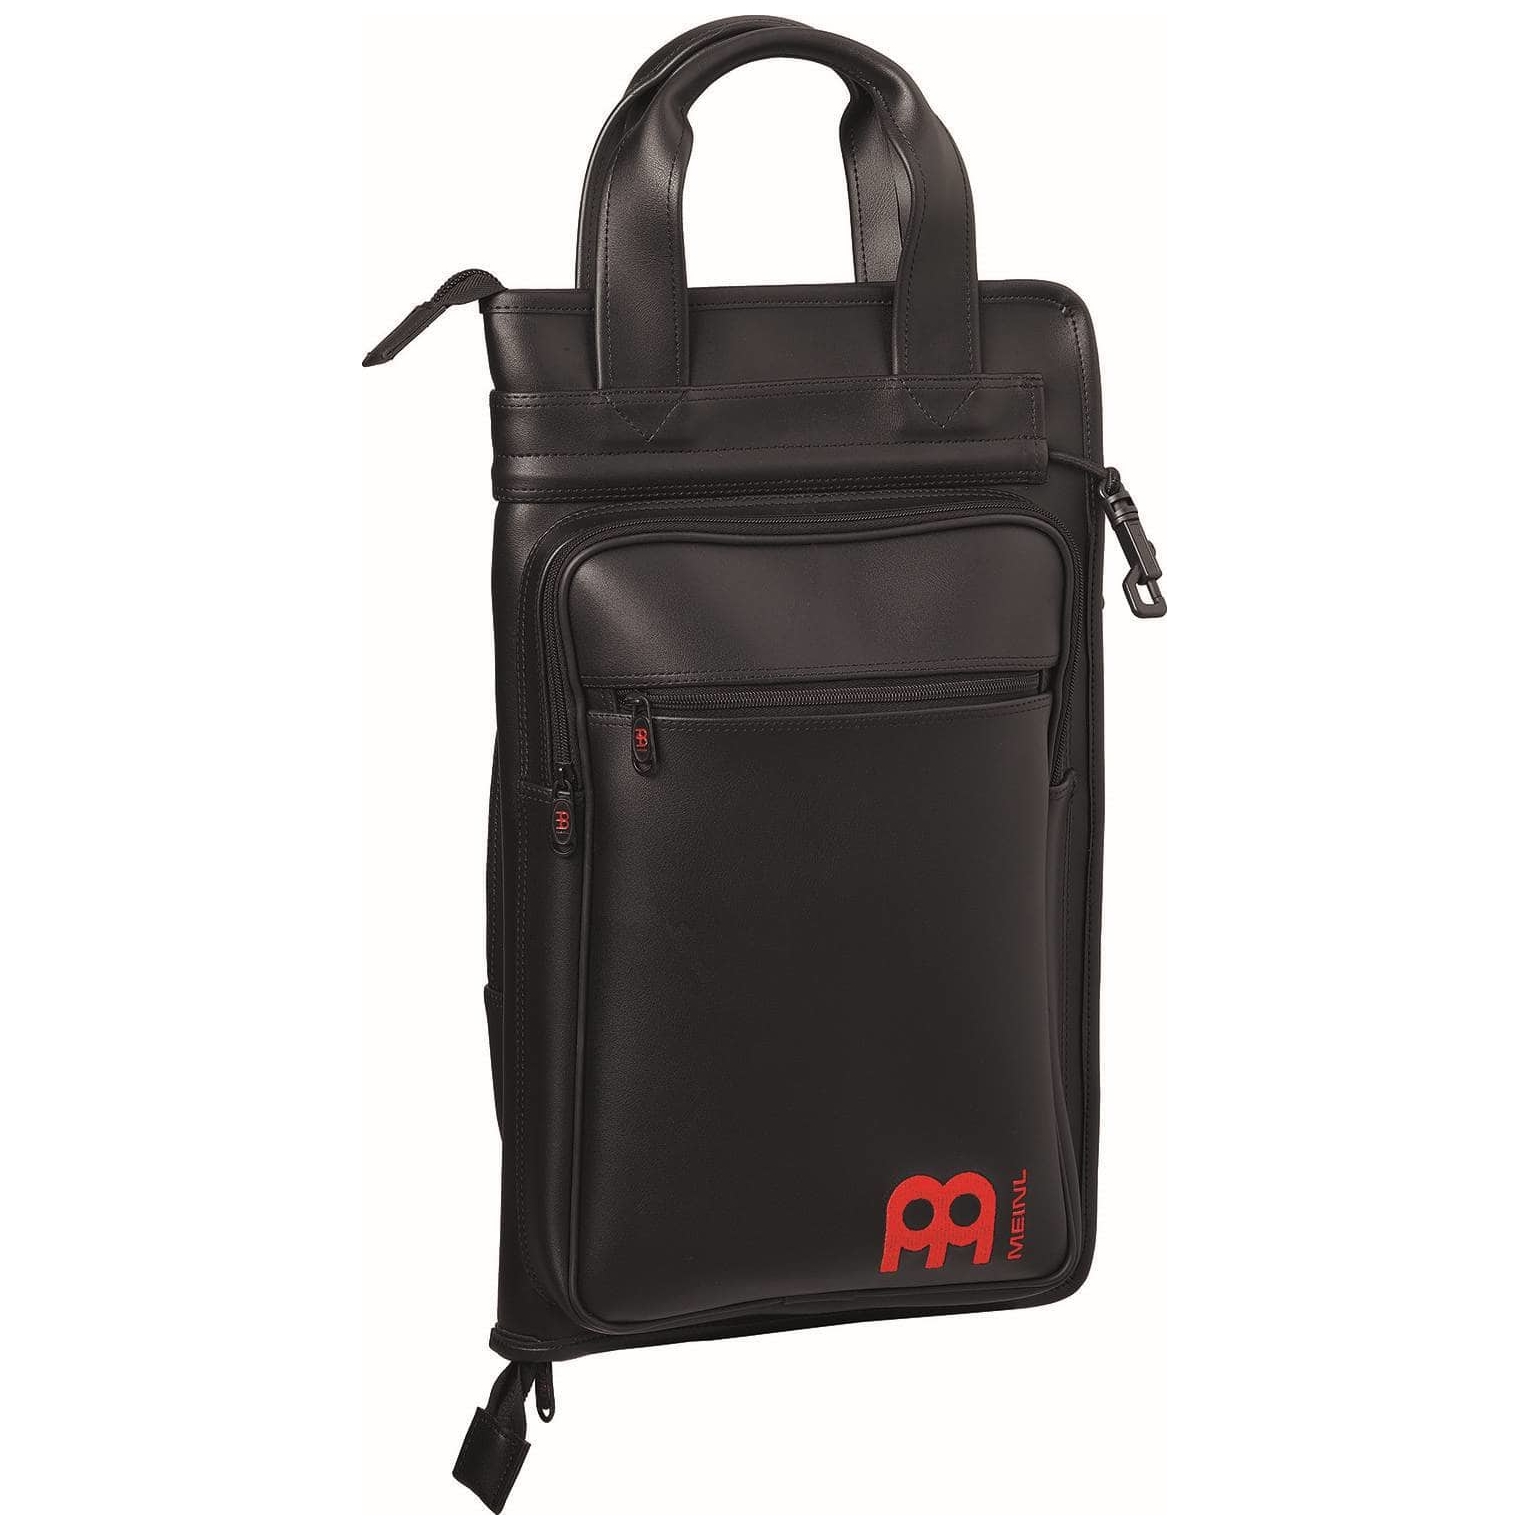 Meinl Cymbals MDLXSB - Deluxe Stick Bag 